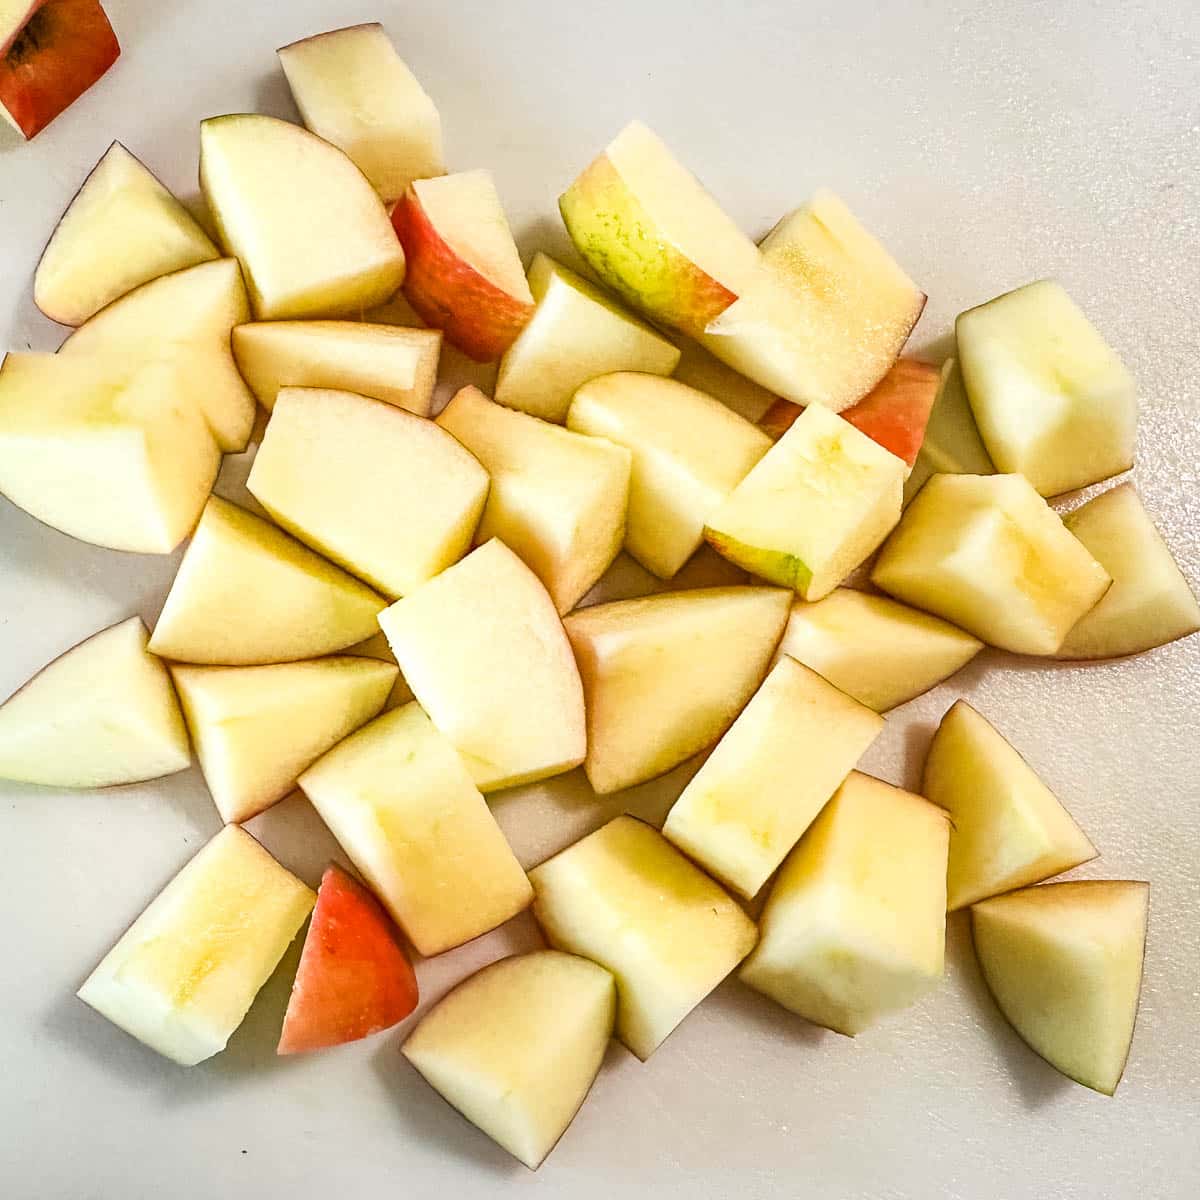 Sliced apples are chopped into bite-sized pieces.